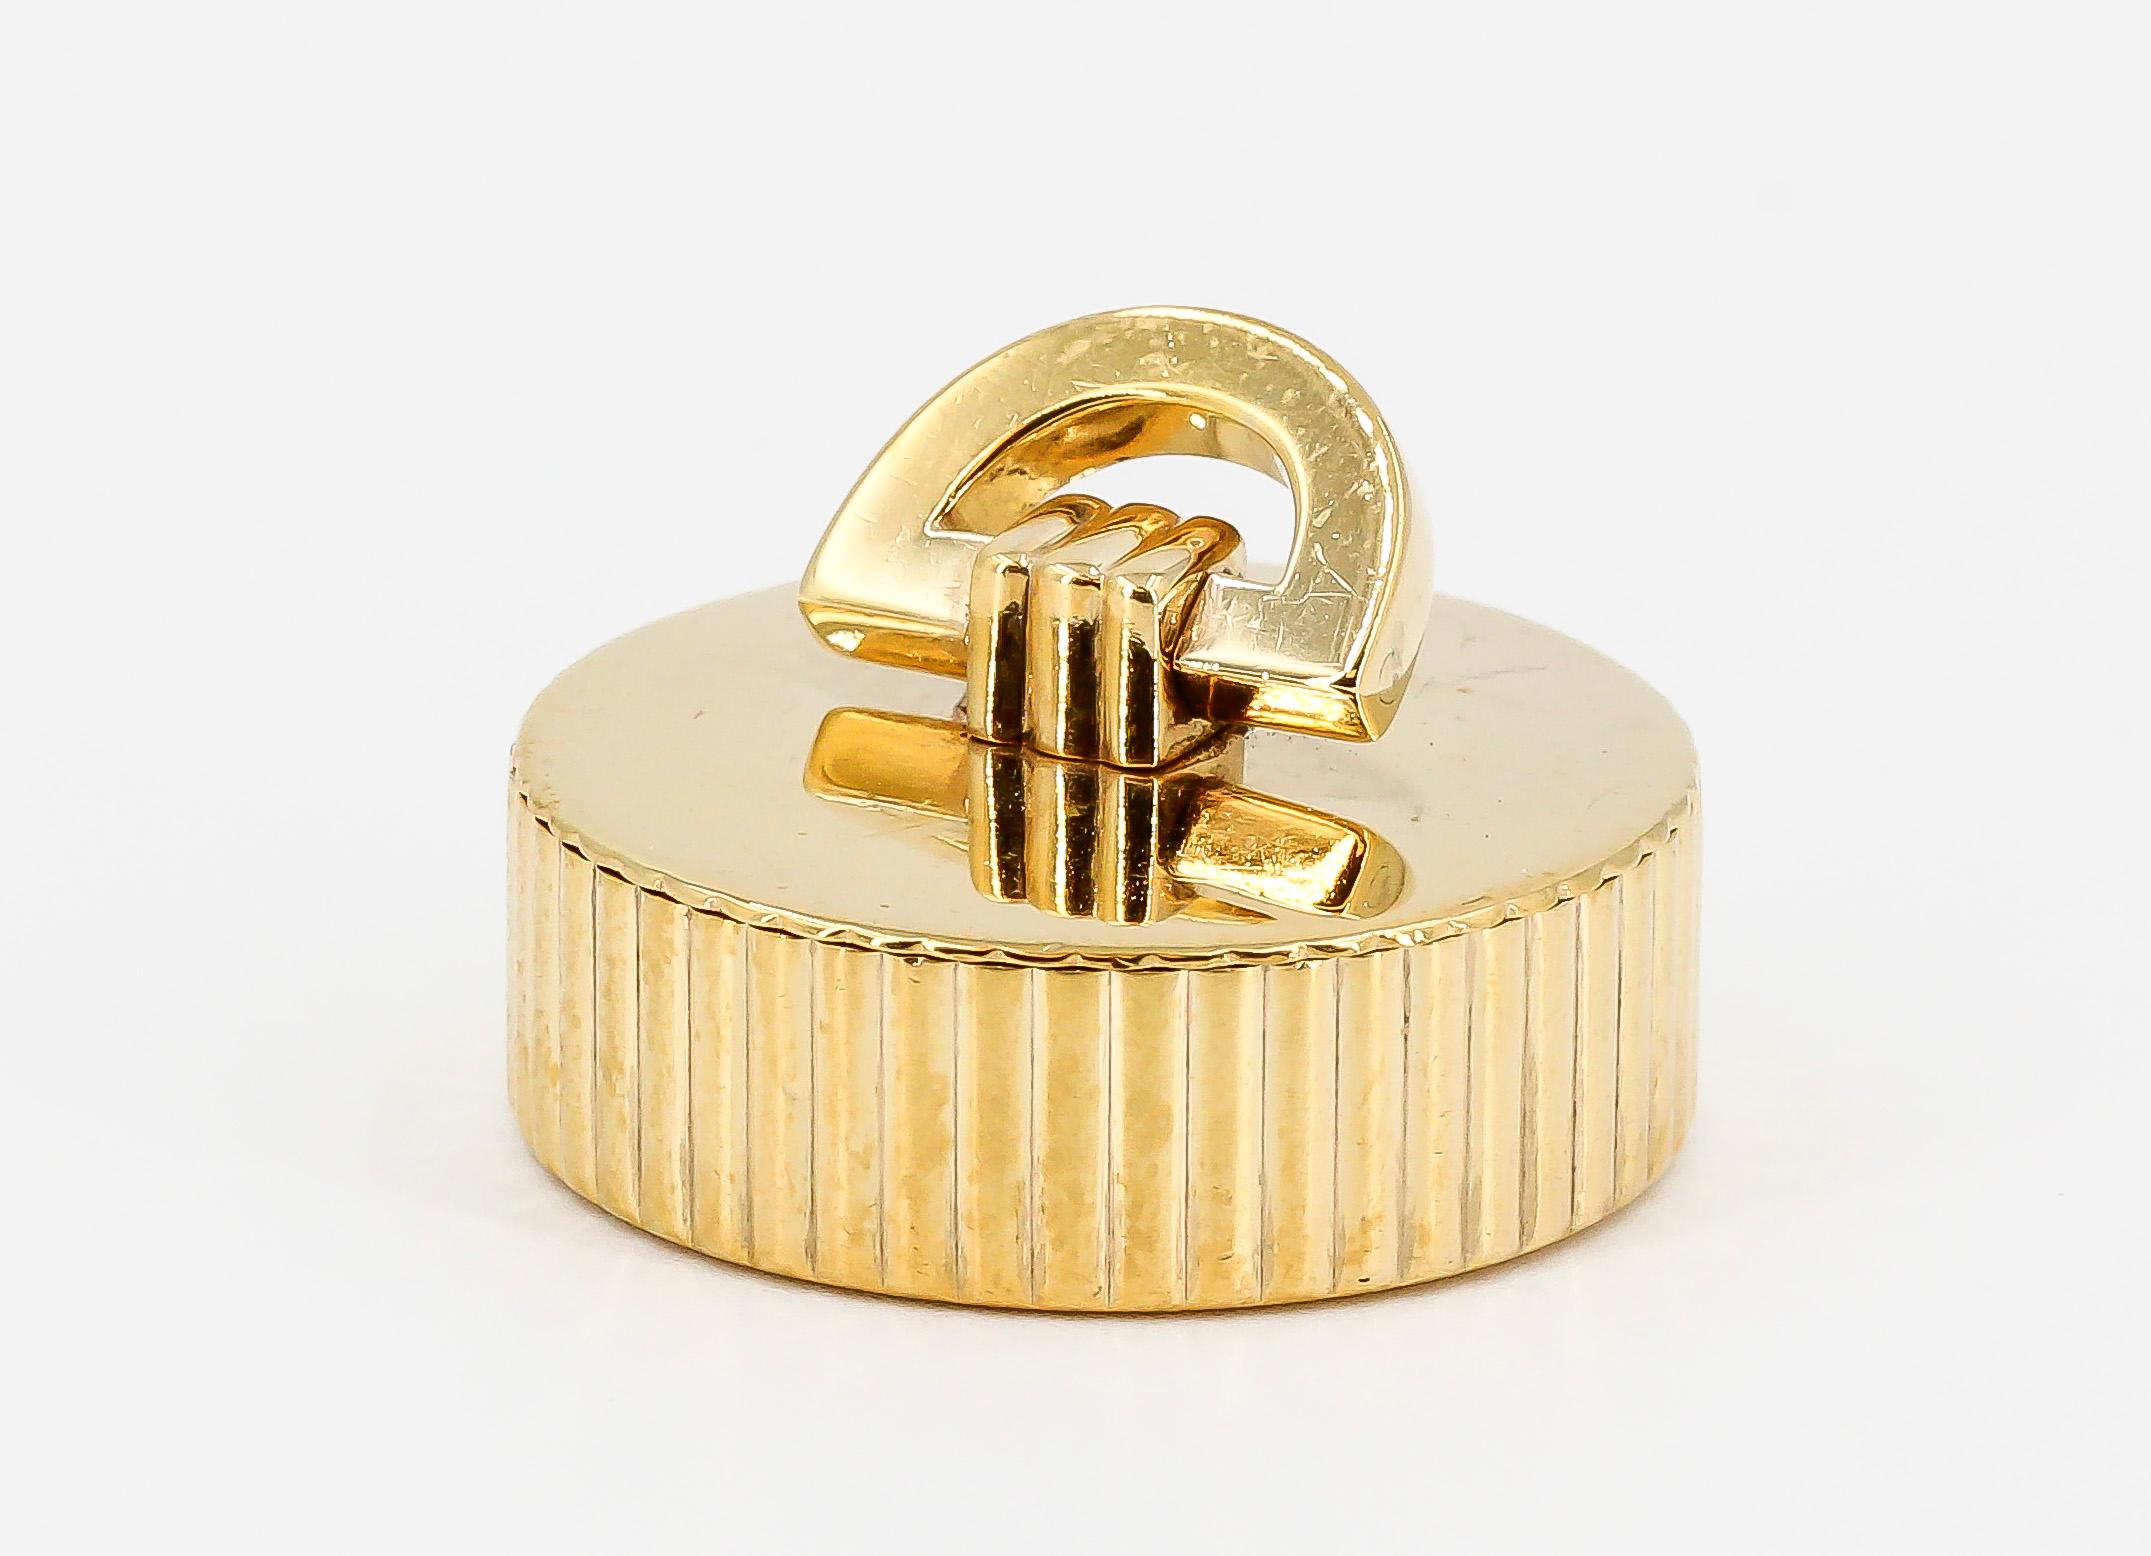 Elegant 9k yellow gold round pill box w/removable lid, circa 1940s. It features a ribbed design on the sides, with removable lid. Beautifully made and easy to carry.

Hallmarks: Cartier London, 9 375, JC, B.